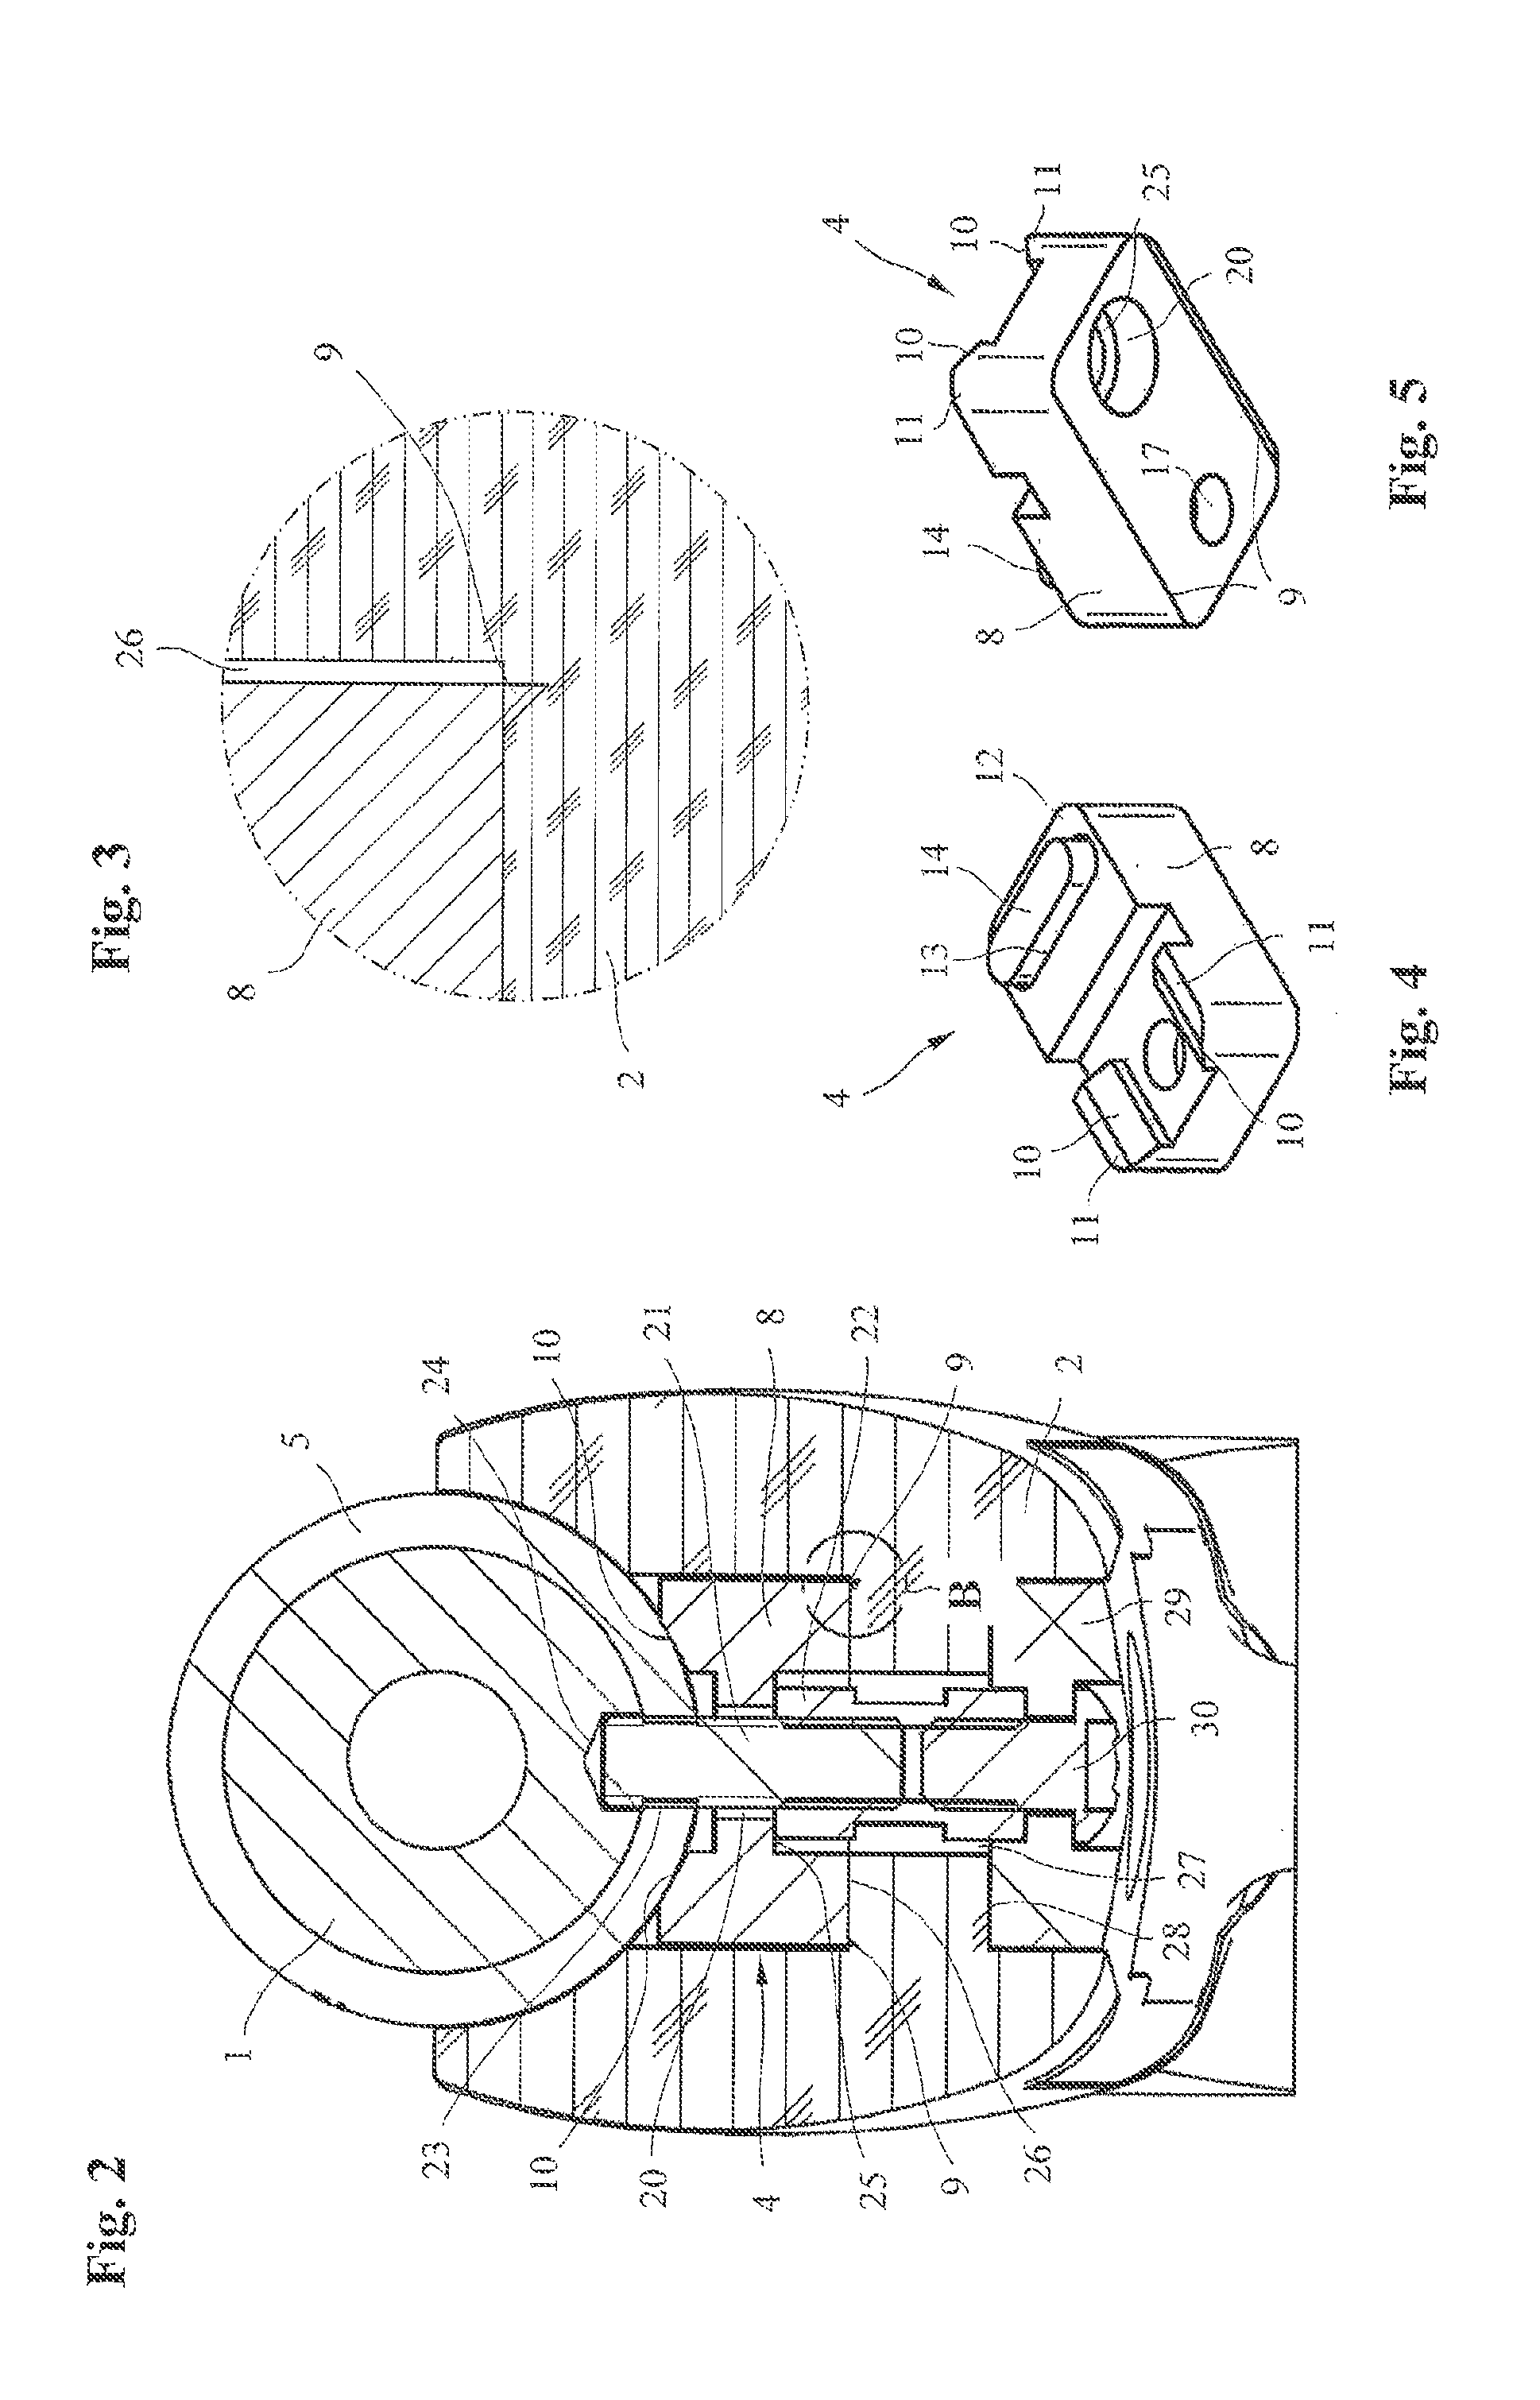 Mechanism for bedding a receiver frame and/or a barrel in a stock of a firearm